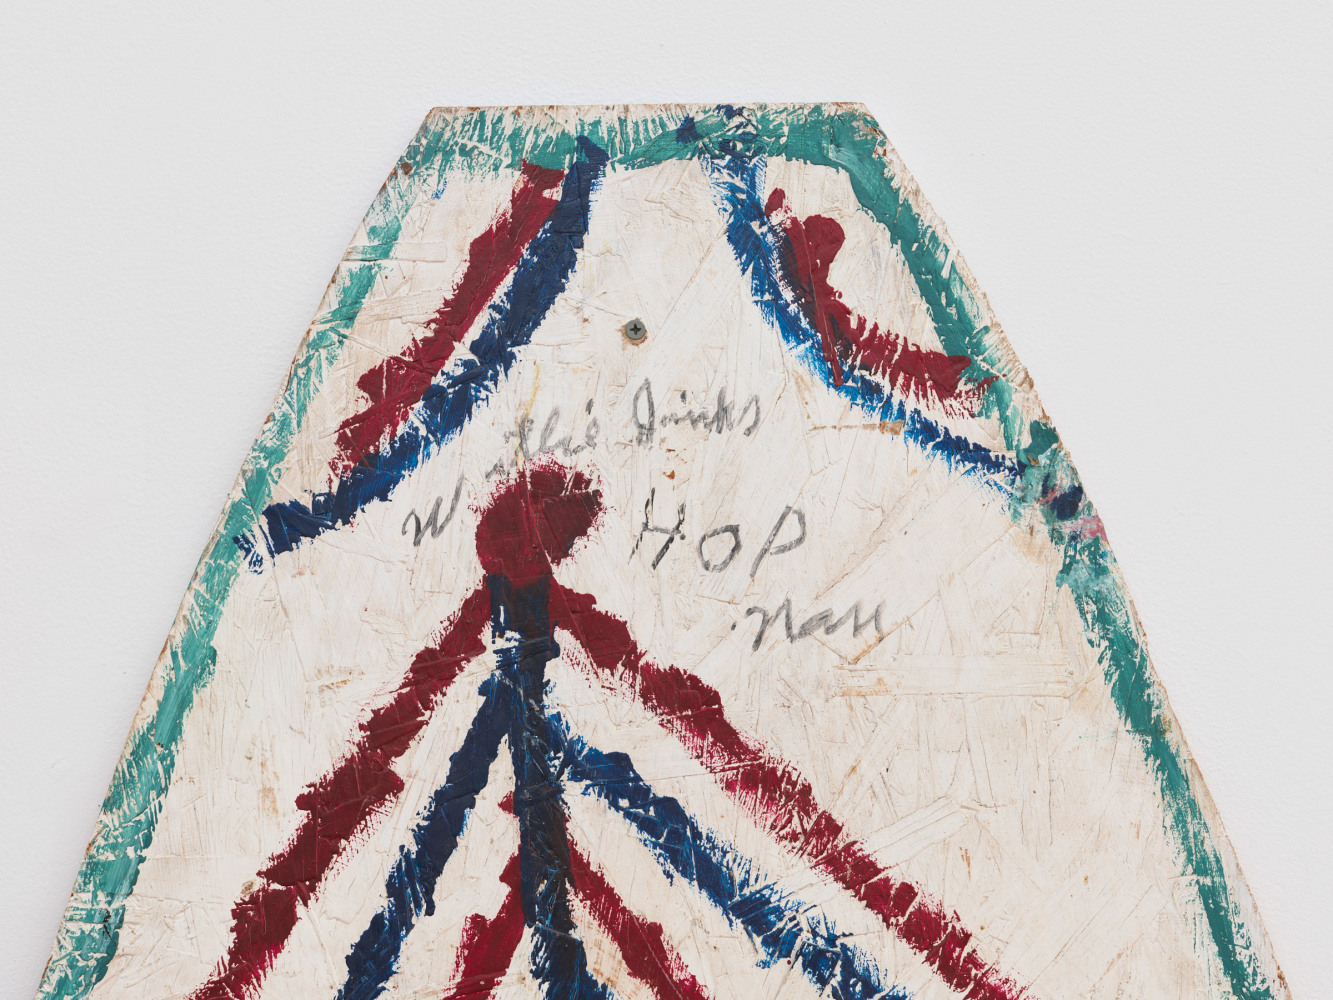 Willie&amp;nbsp;Jinks
Untitled (&amp;quot;Fite&amp;quot;), ca 1980s
(detail view)